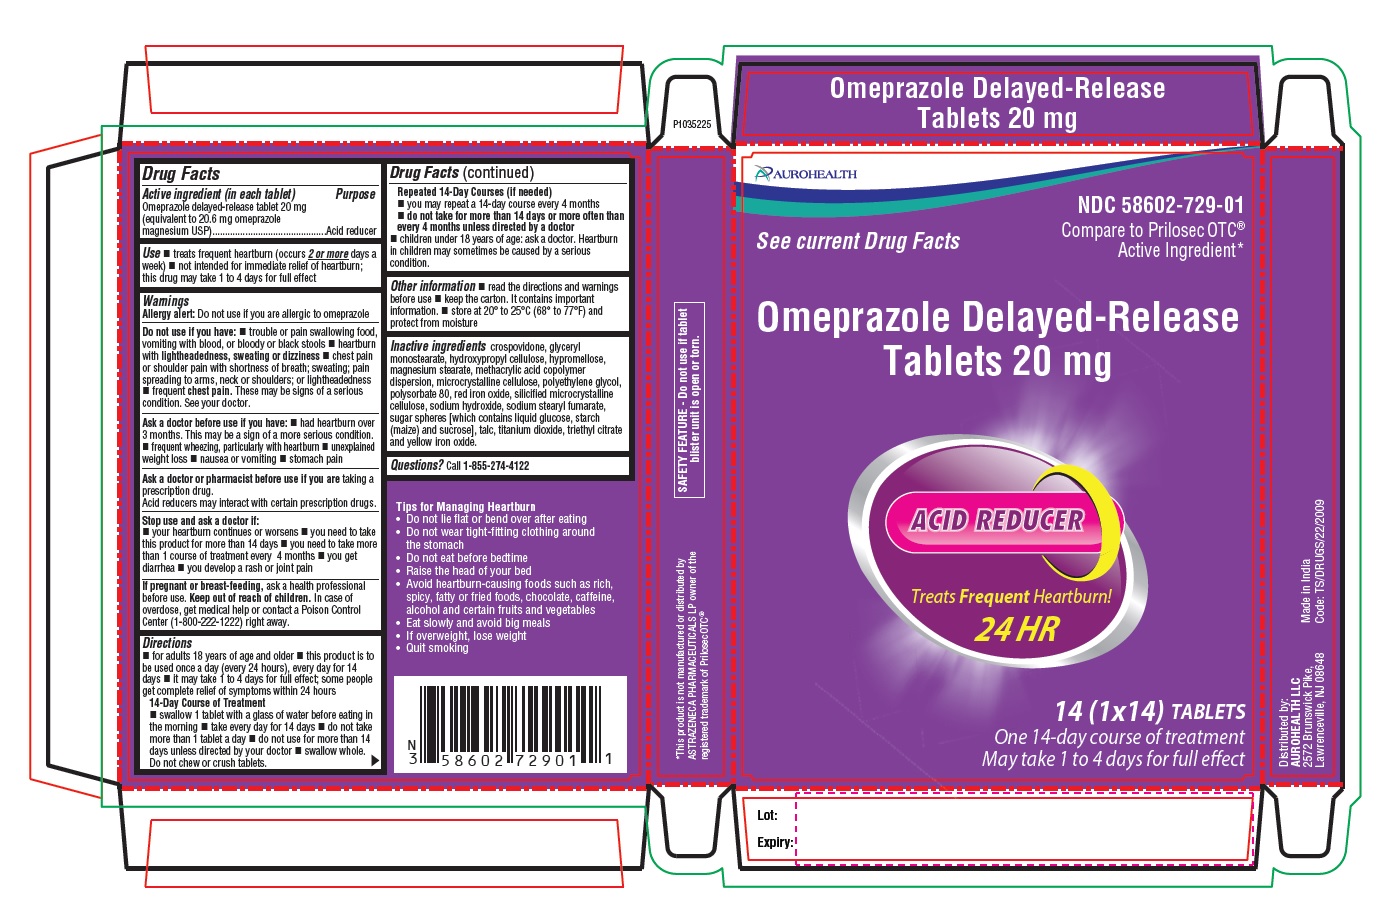 PACKAGE LABEL-PRINCIPAL DISPLAY PANEL - 20 mg Container Carton Label 14(1x14) Tablets